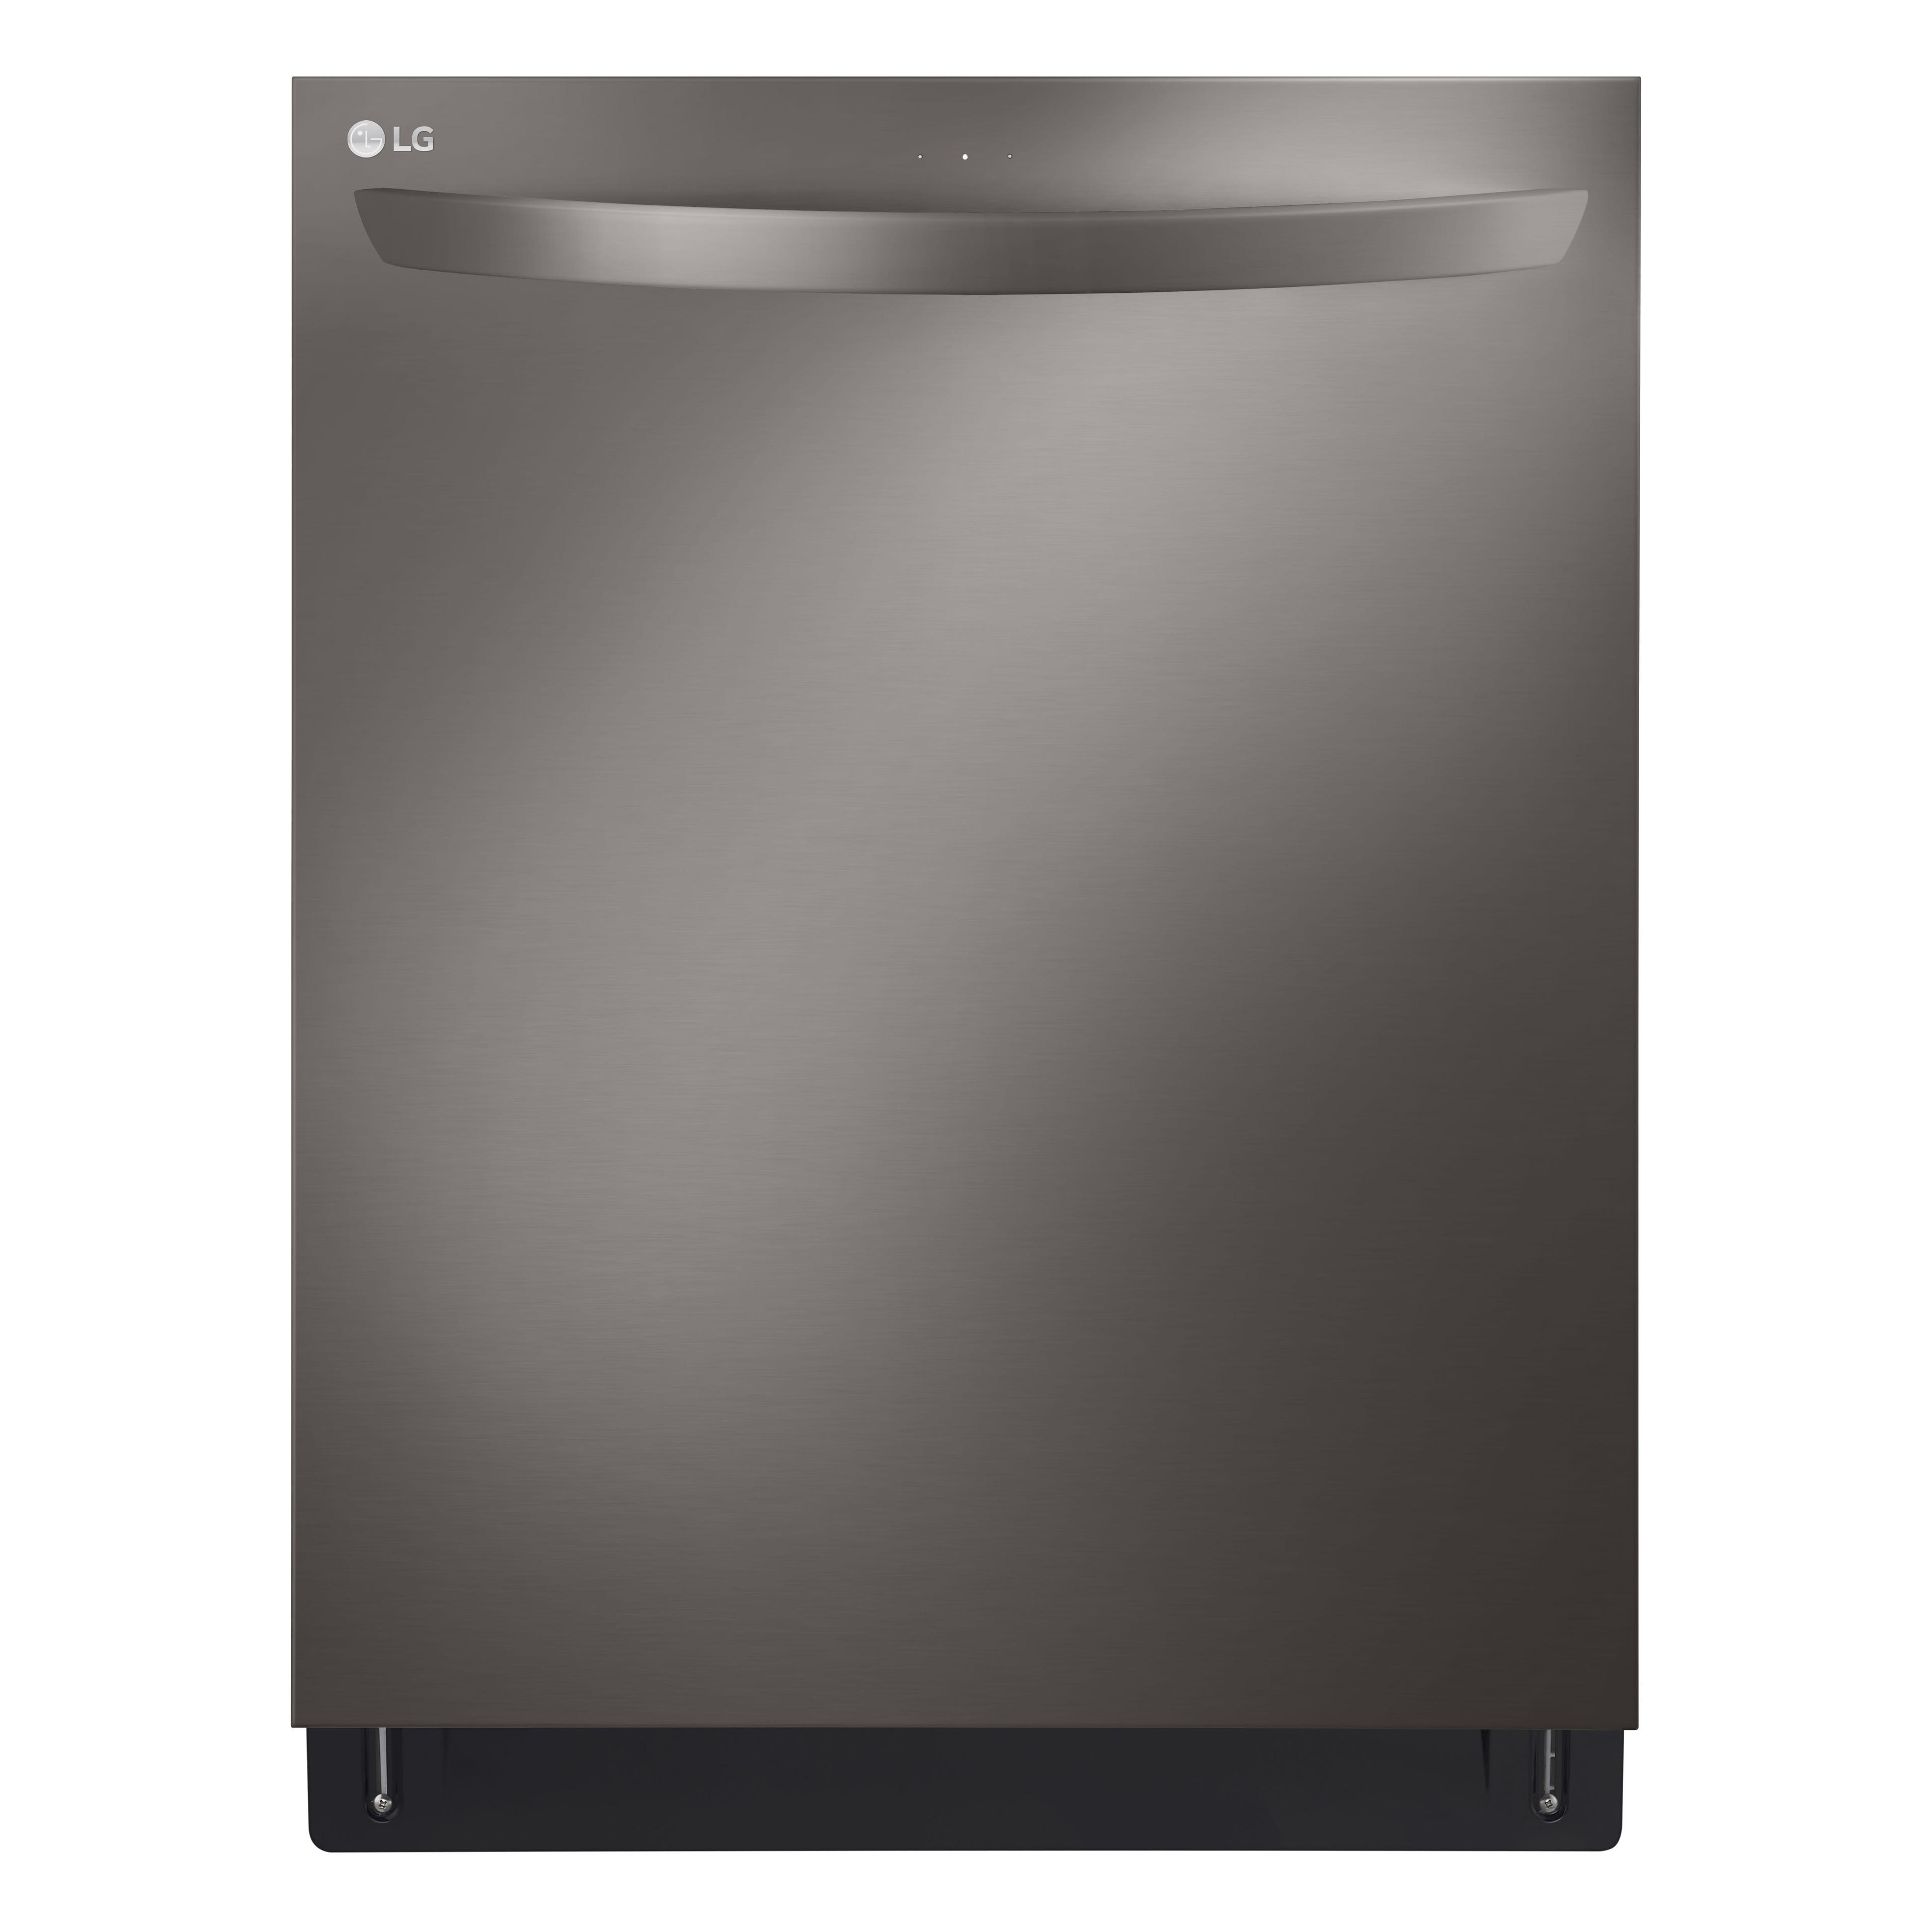 LG LDTS5552D 24" Fully Integrated Smart Dishwasher in Black Stainless Steel